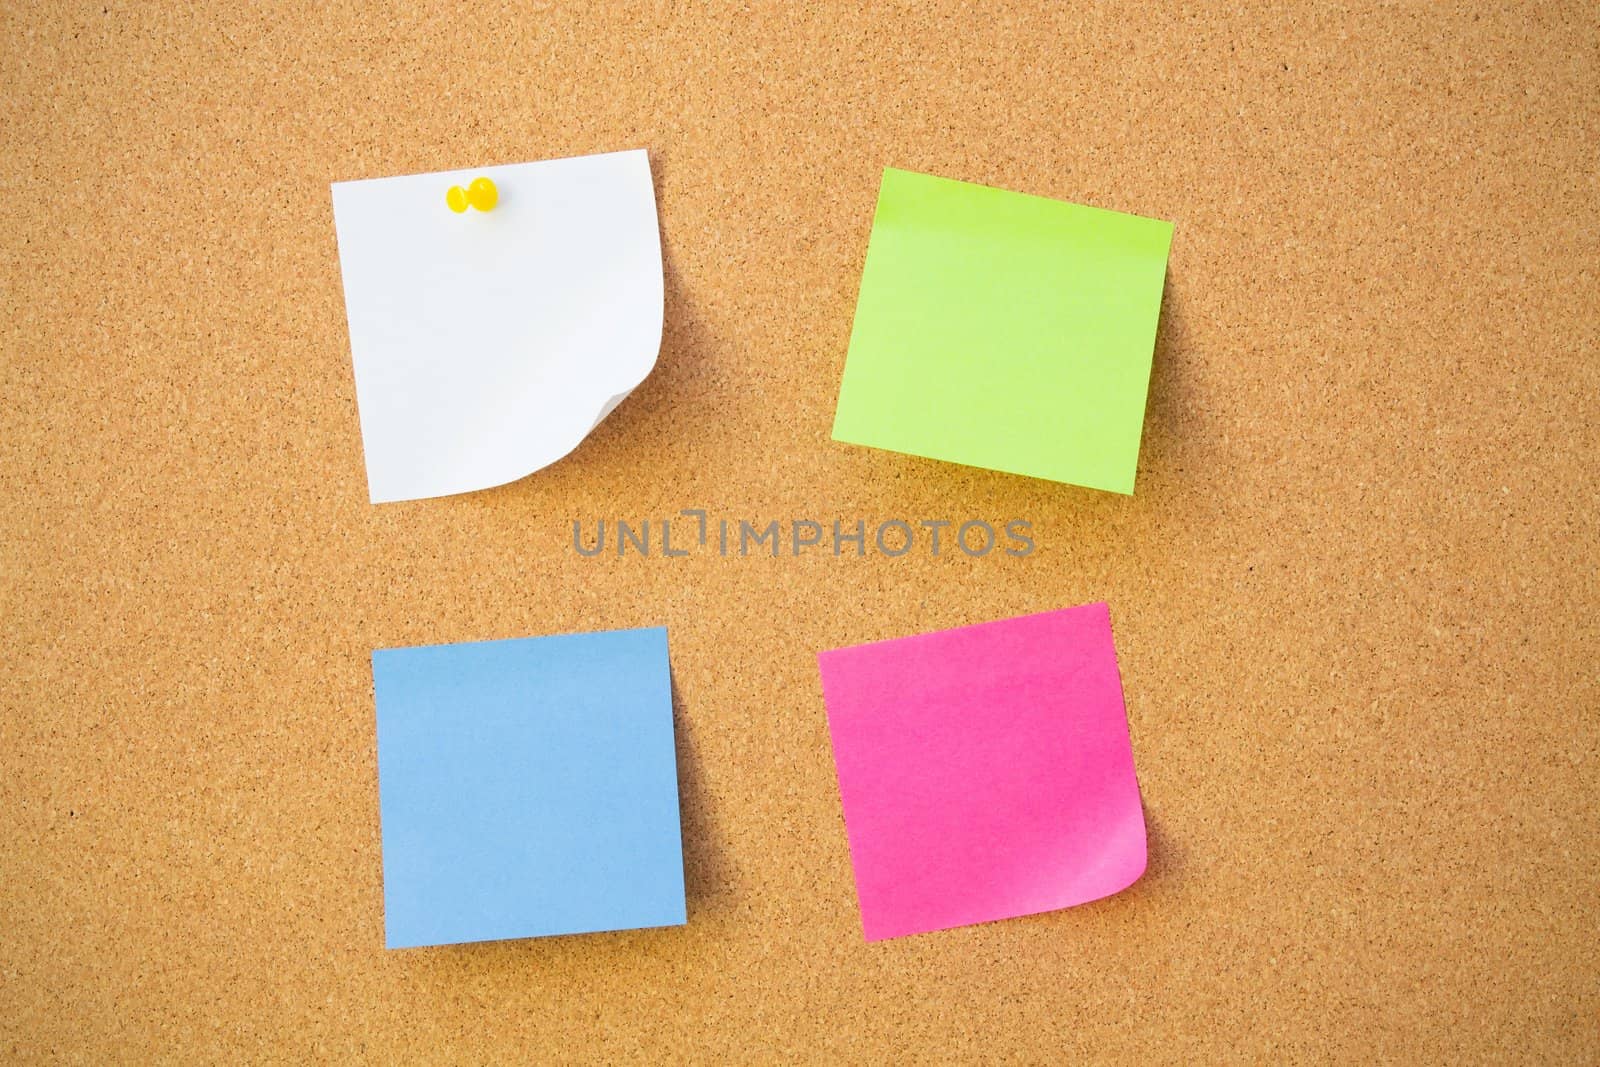 Colour note papers on pin board. Cork background  by simpson33